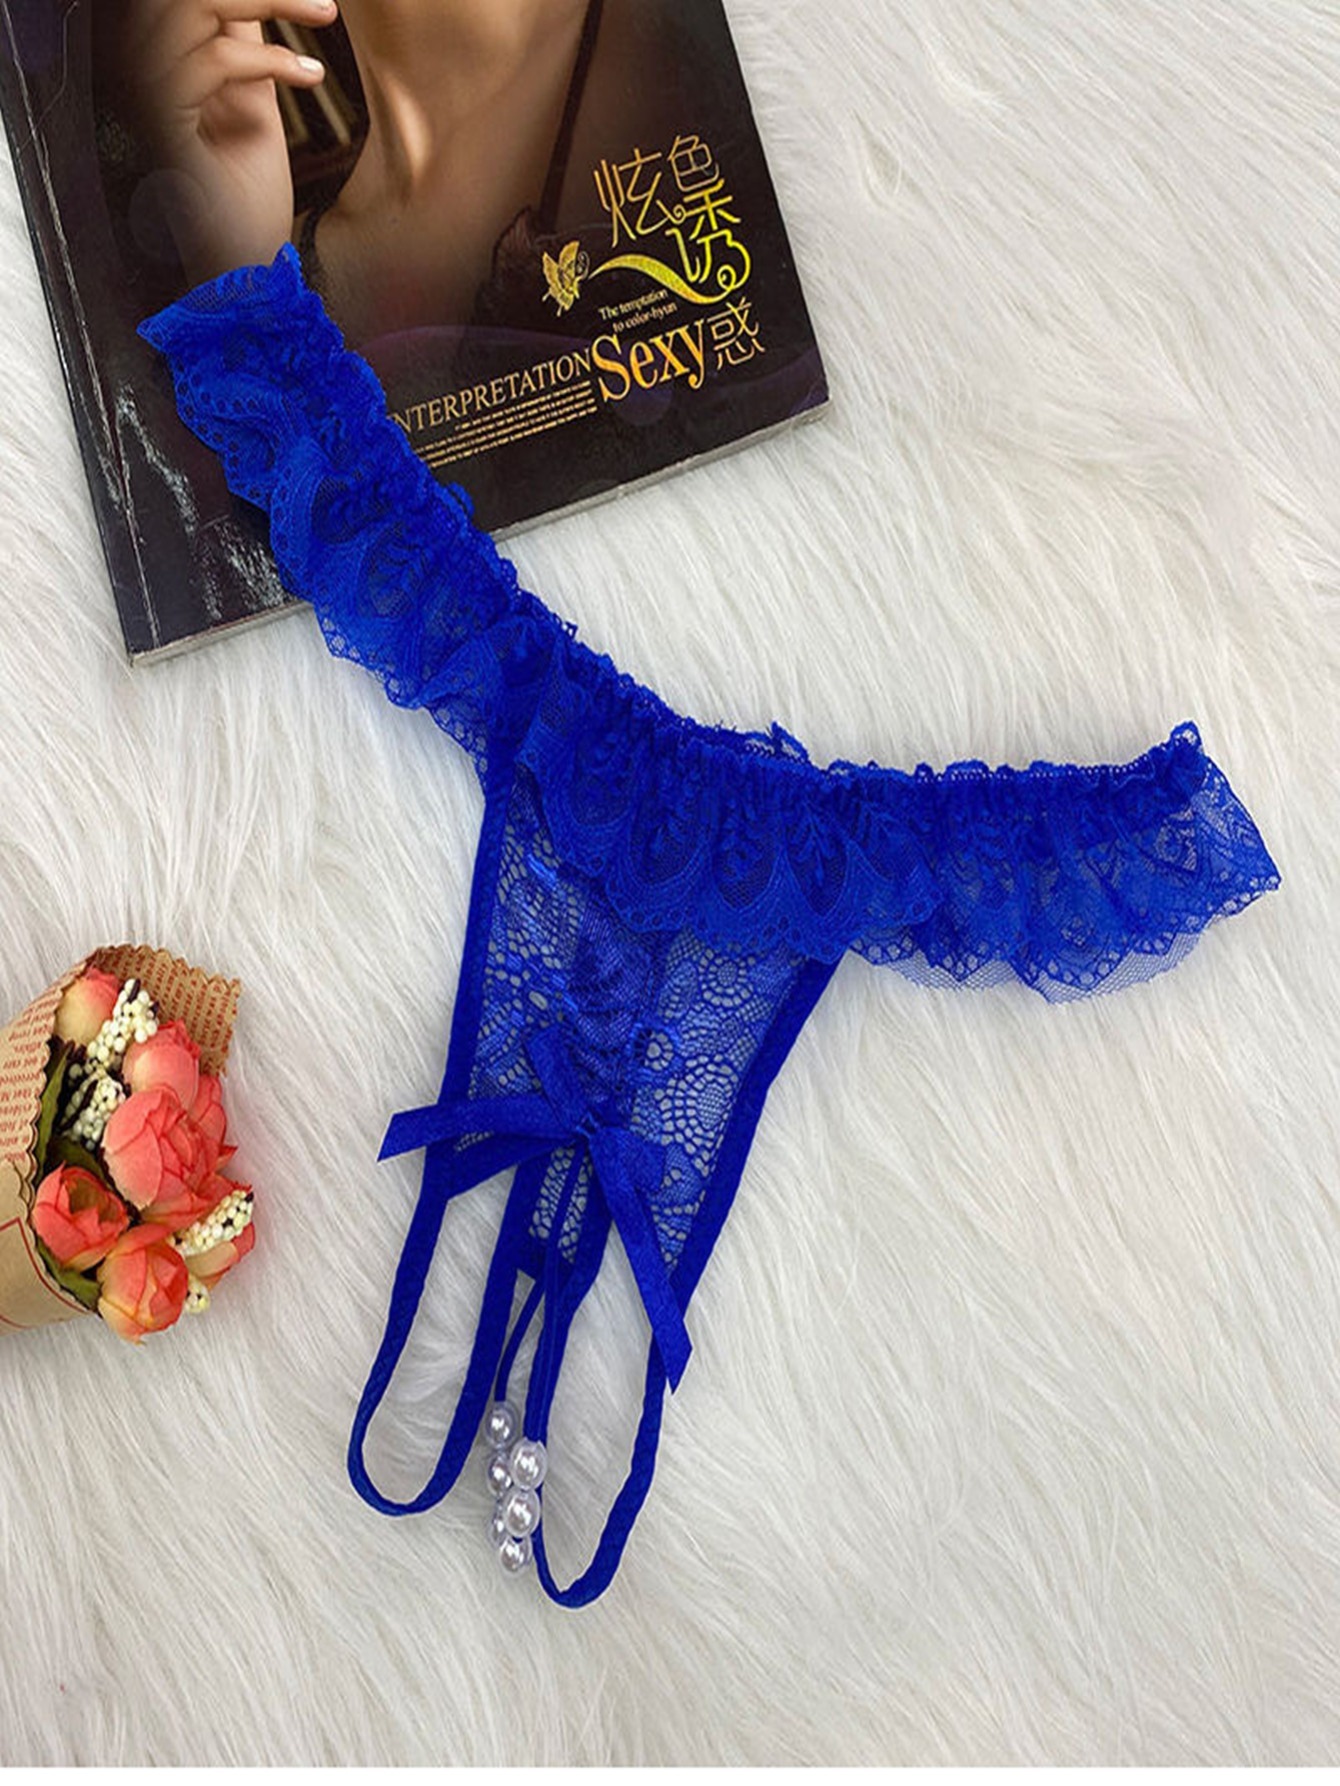 Lace panties for women - Sexy panties with beads - open crotch